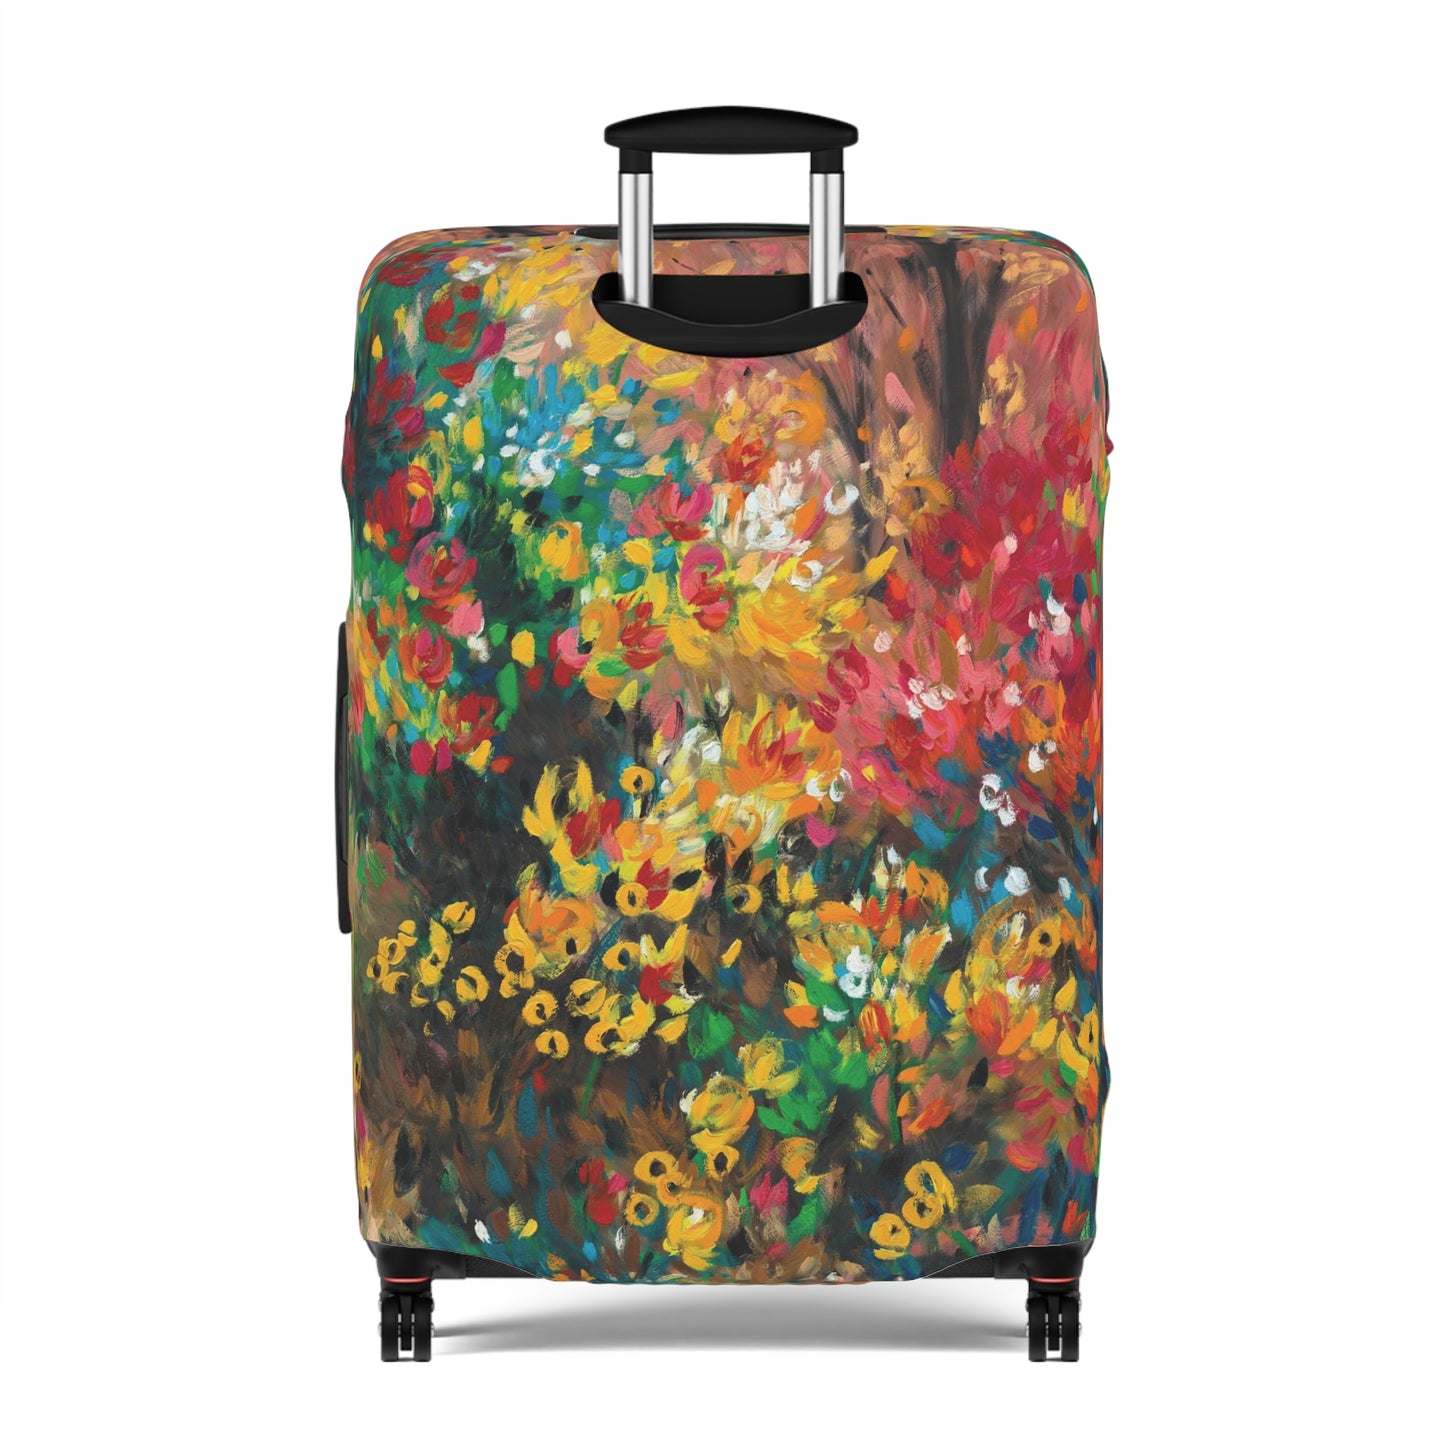 A Captured Heart Luggage Cover